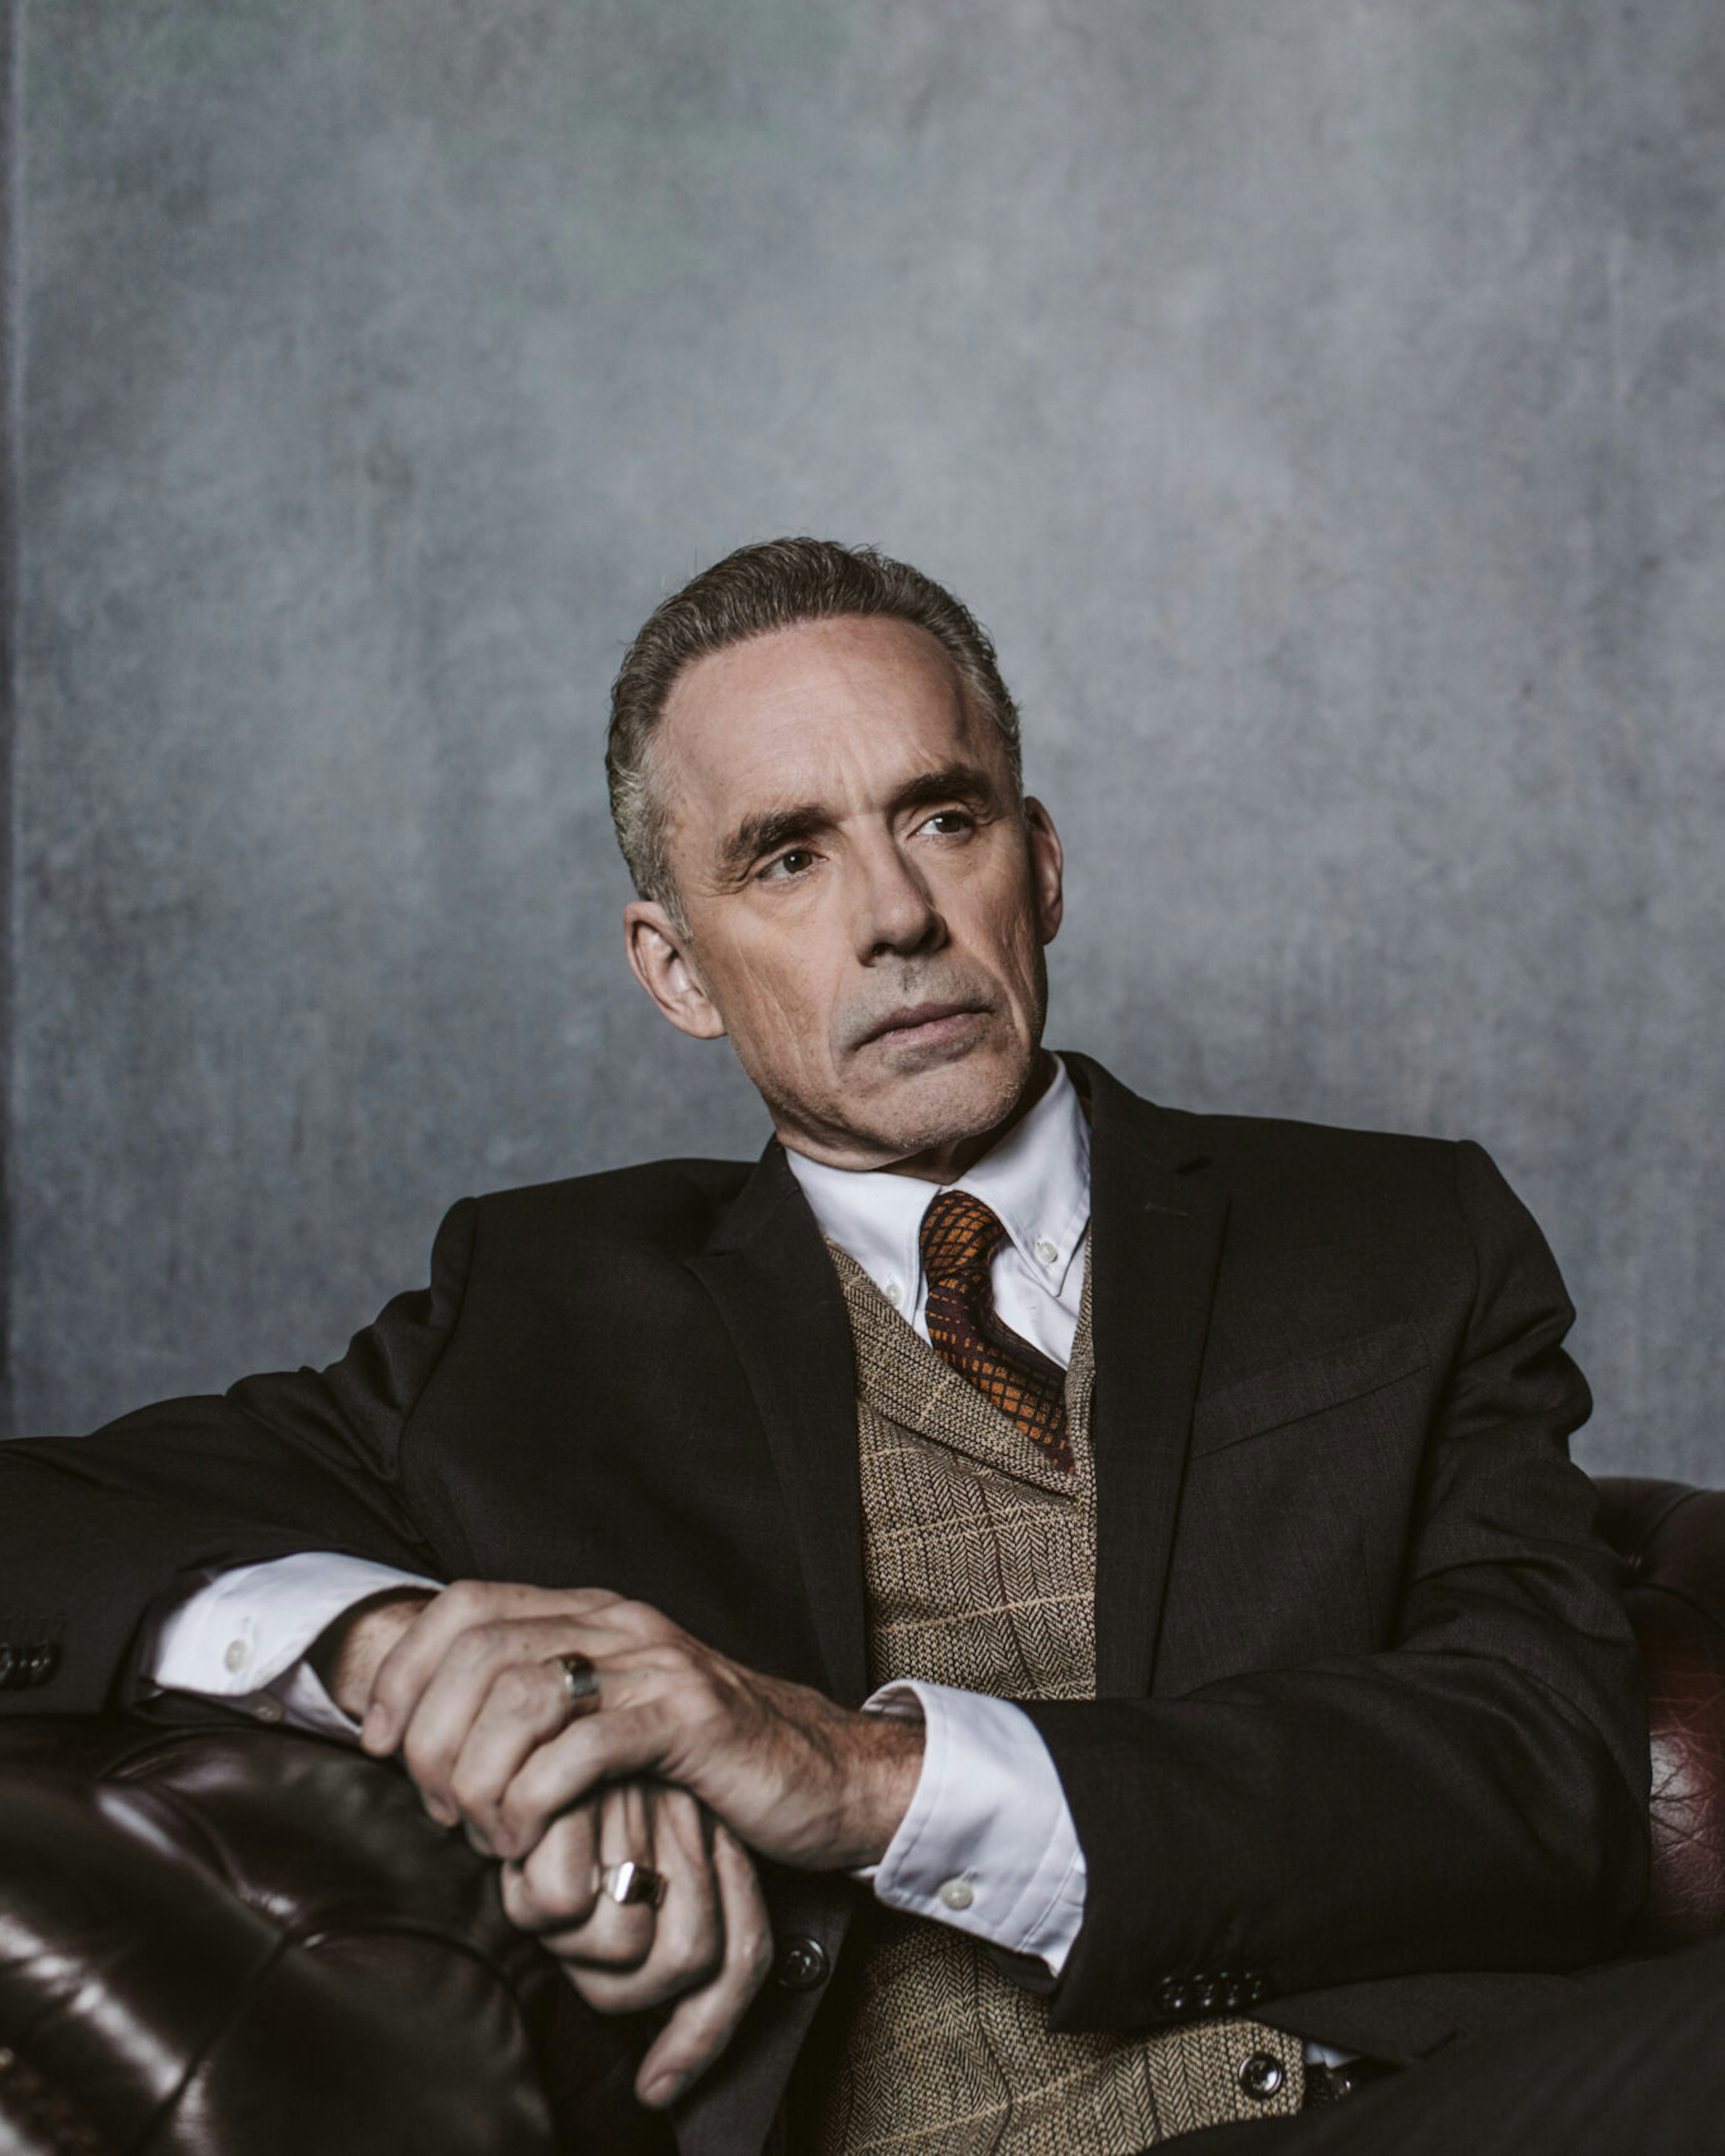 Jordan Peterson, who just joined DailyWire+, sat down with Megan Basham for an exclusive interview